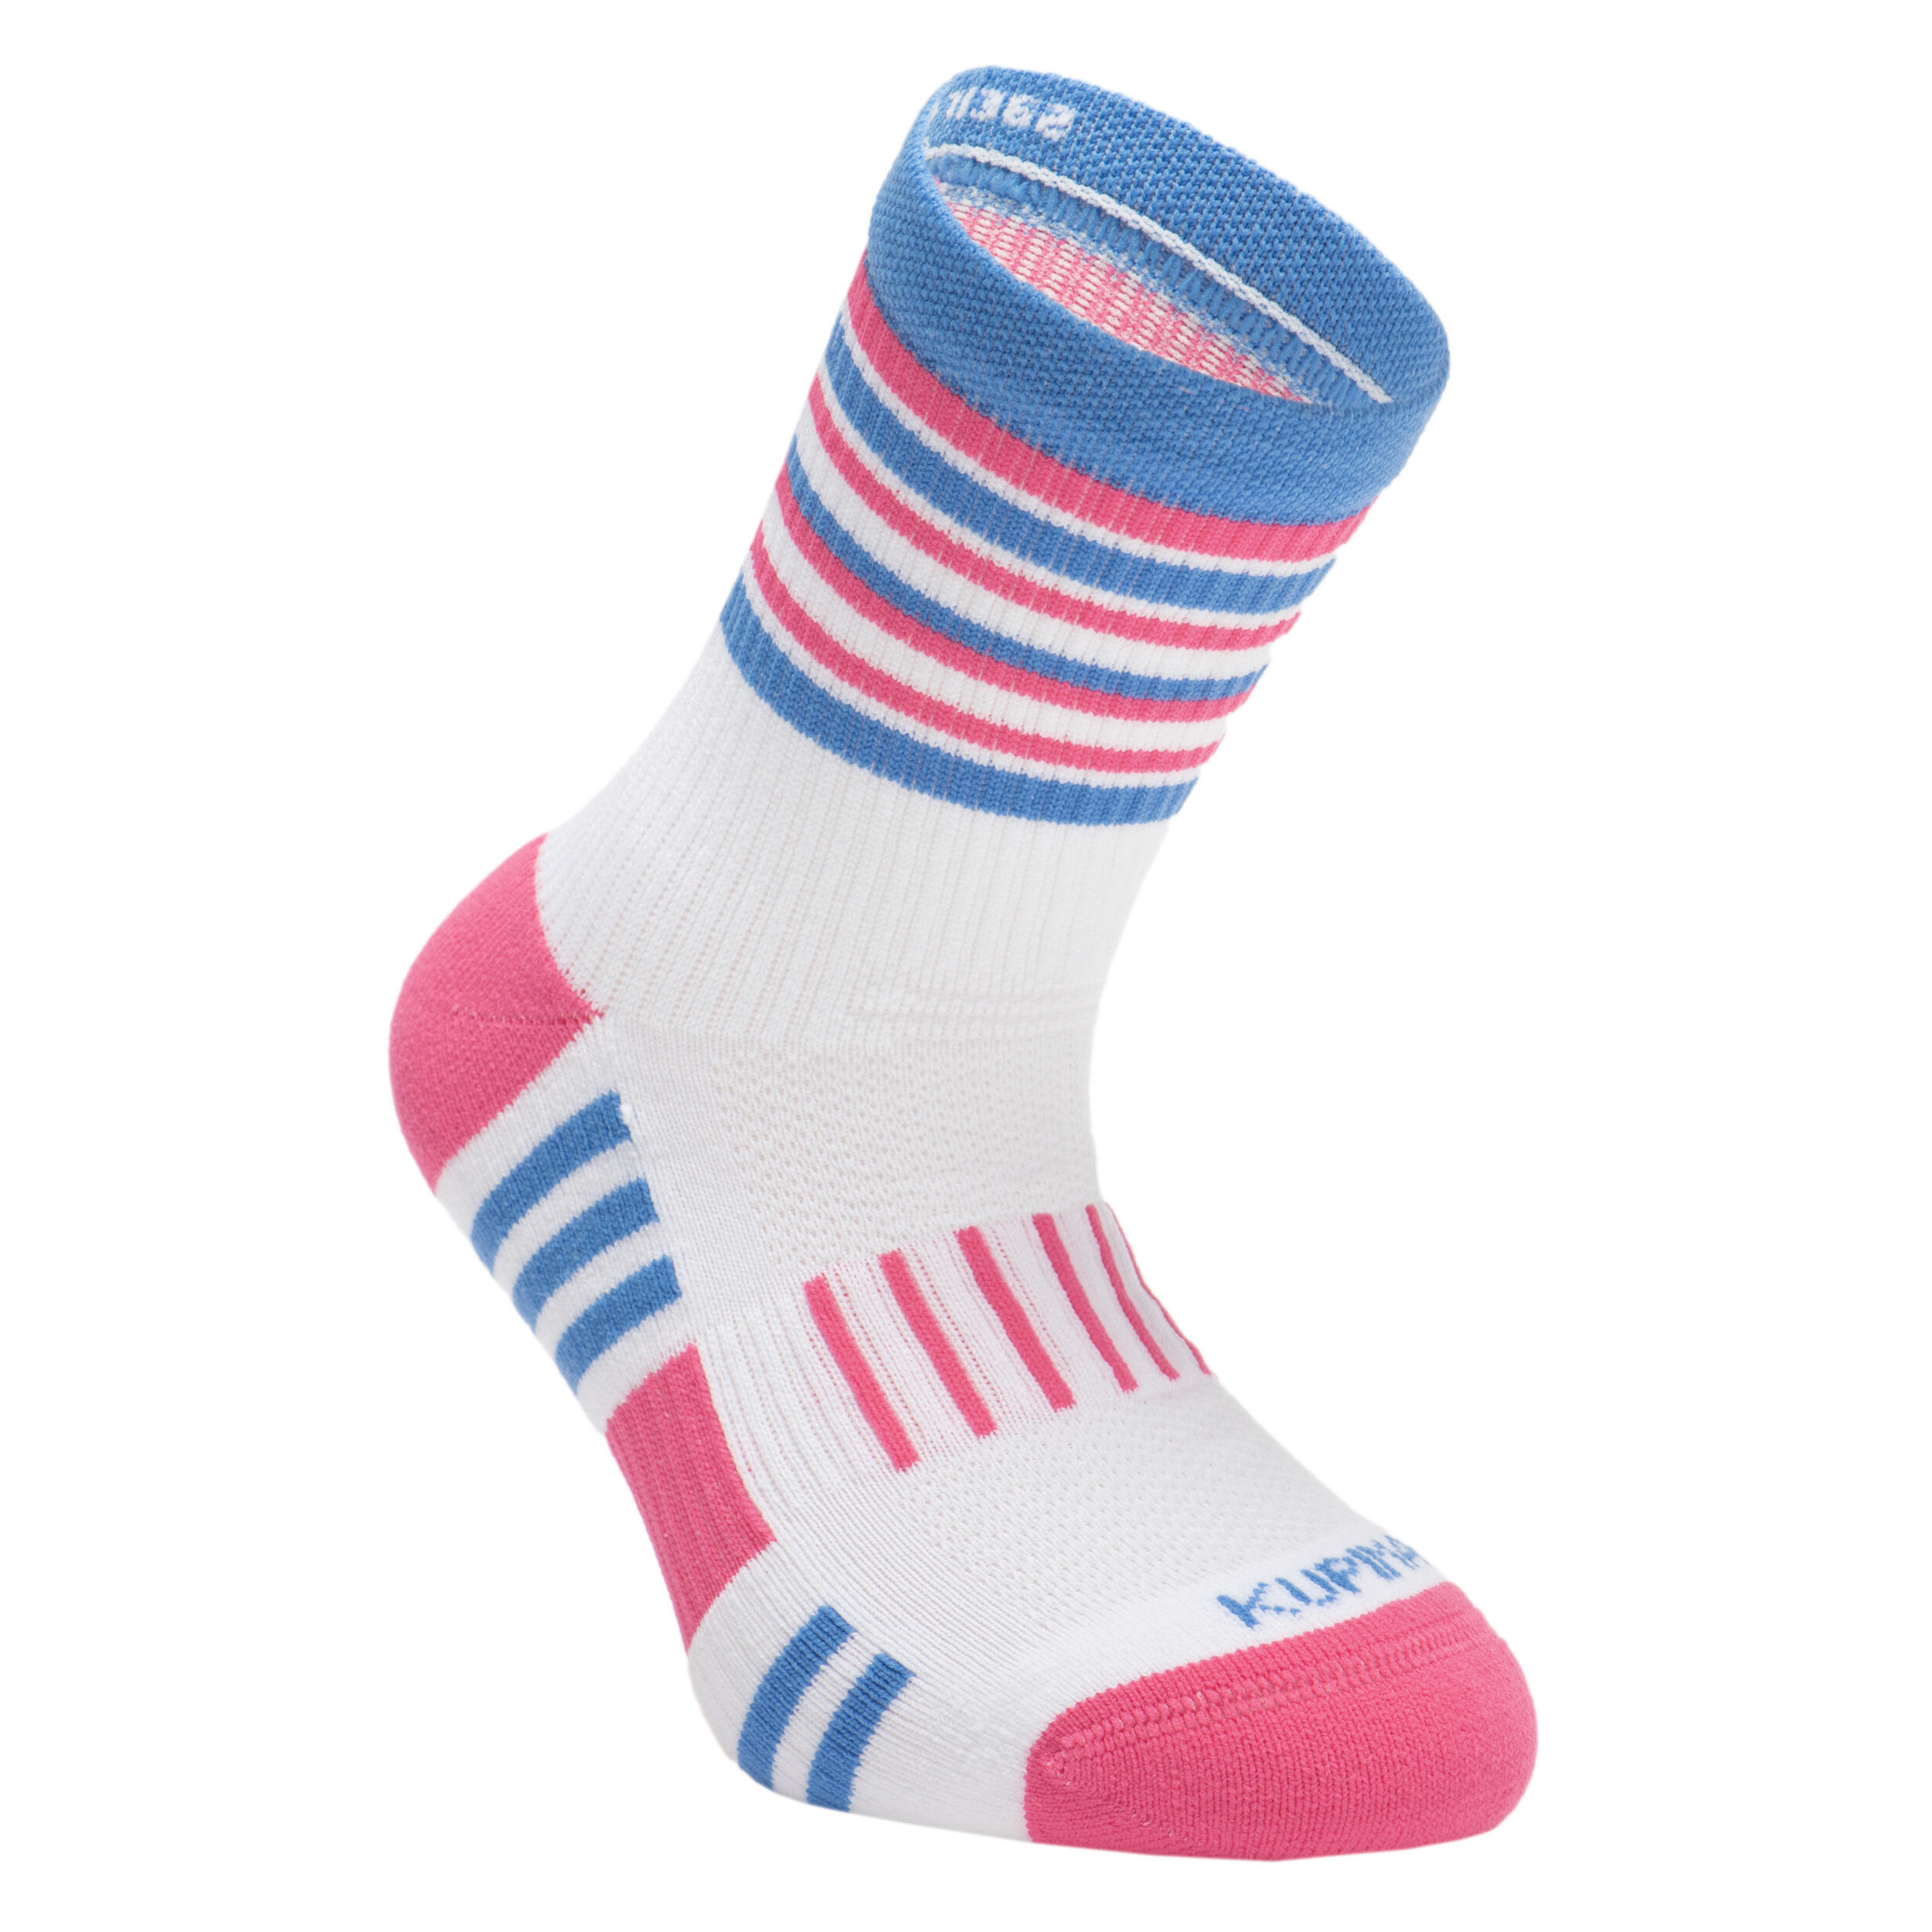 Kids' Socks AT 500 Mid 2-Pack - Plain Pink and White Pink Blue Stripes 2/13